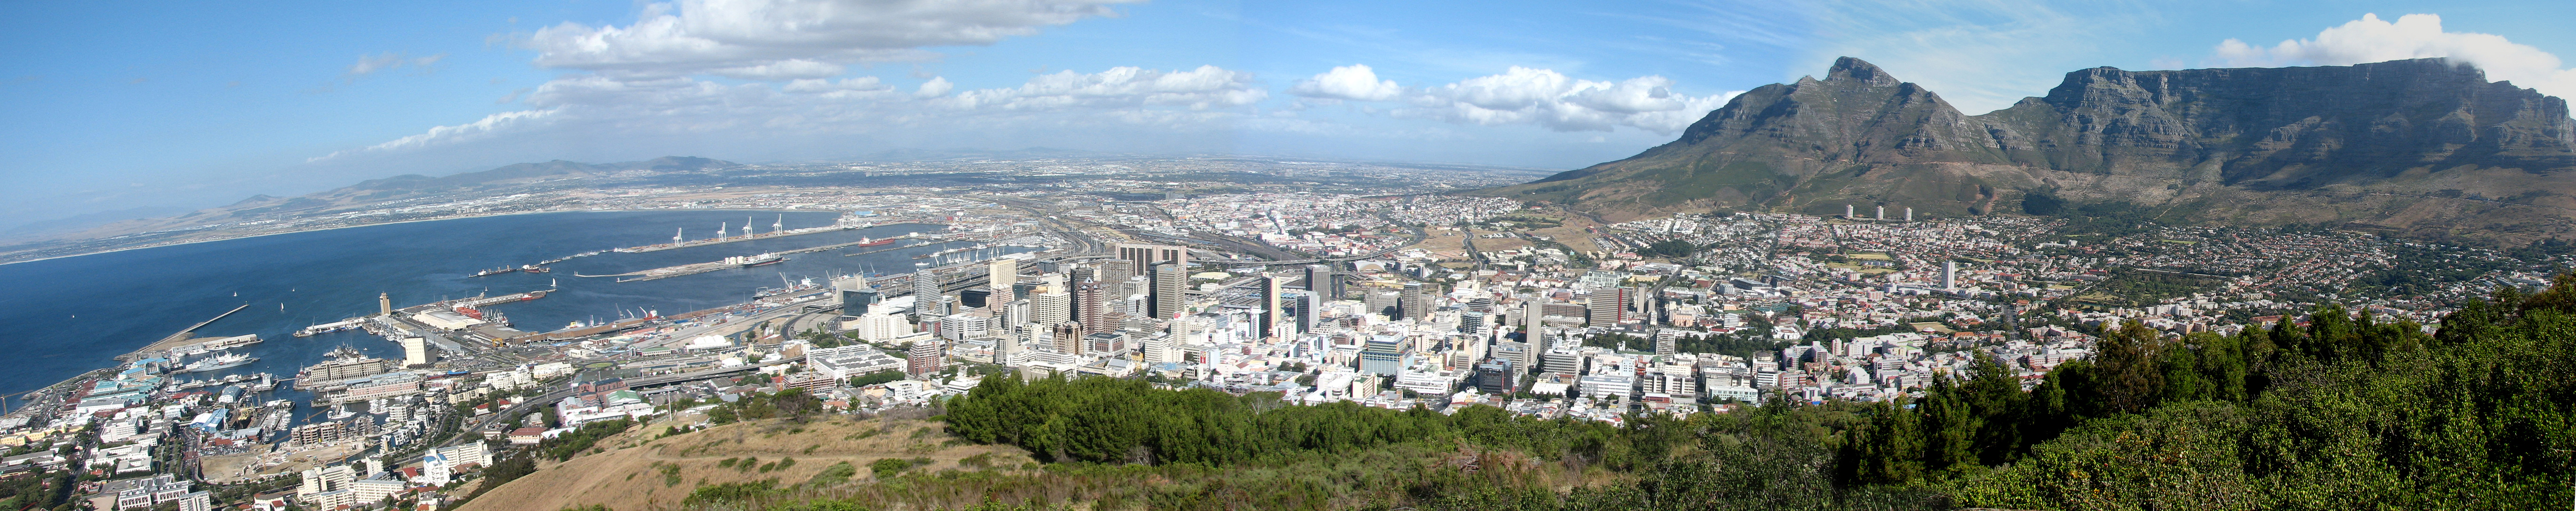 Panoramic View Of Cape Town City Bowl From Lion S Head South Africa Image Free Stock Photo Public Domain Photo Cc0 Images